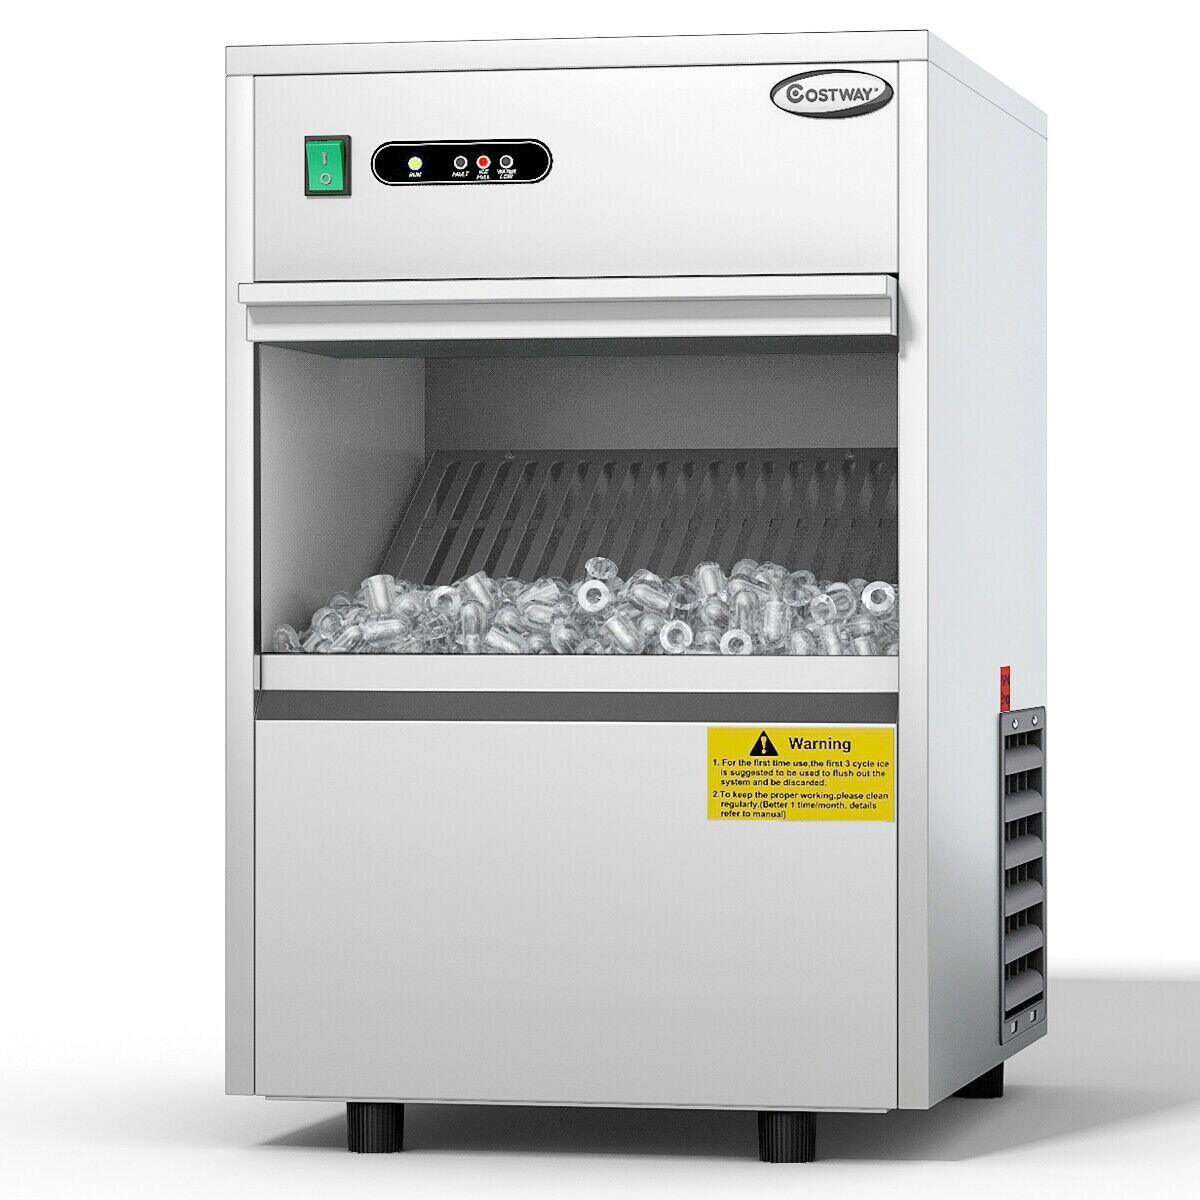 https://ak1.ostkcdn.com/images/products/is/images/direct/bc864f334fab1d76eb69afbb8400977dd60cab3c/Costway-Automatic-Ice-Maker-Stainless-Steel-58lbs-24h-Freestanding-Commercial-Home-Use.jpg